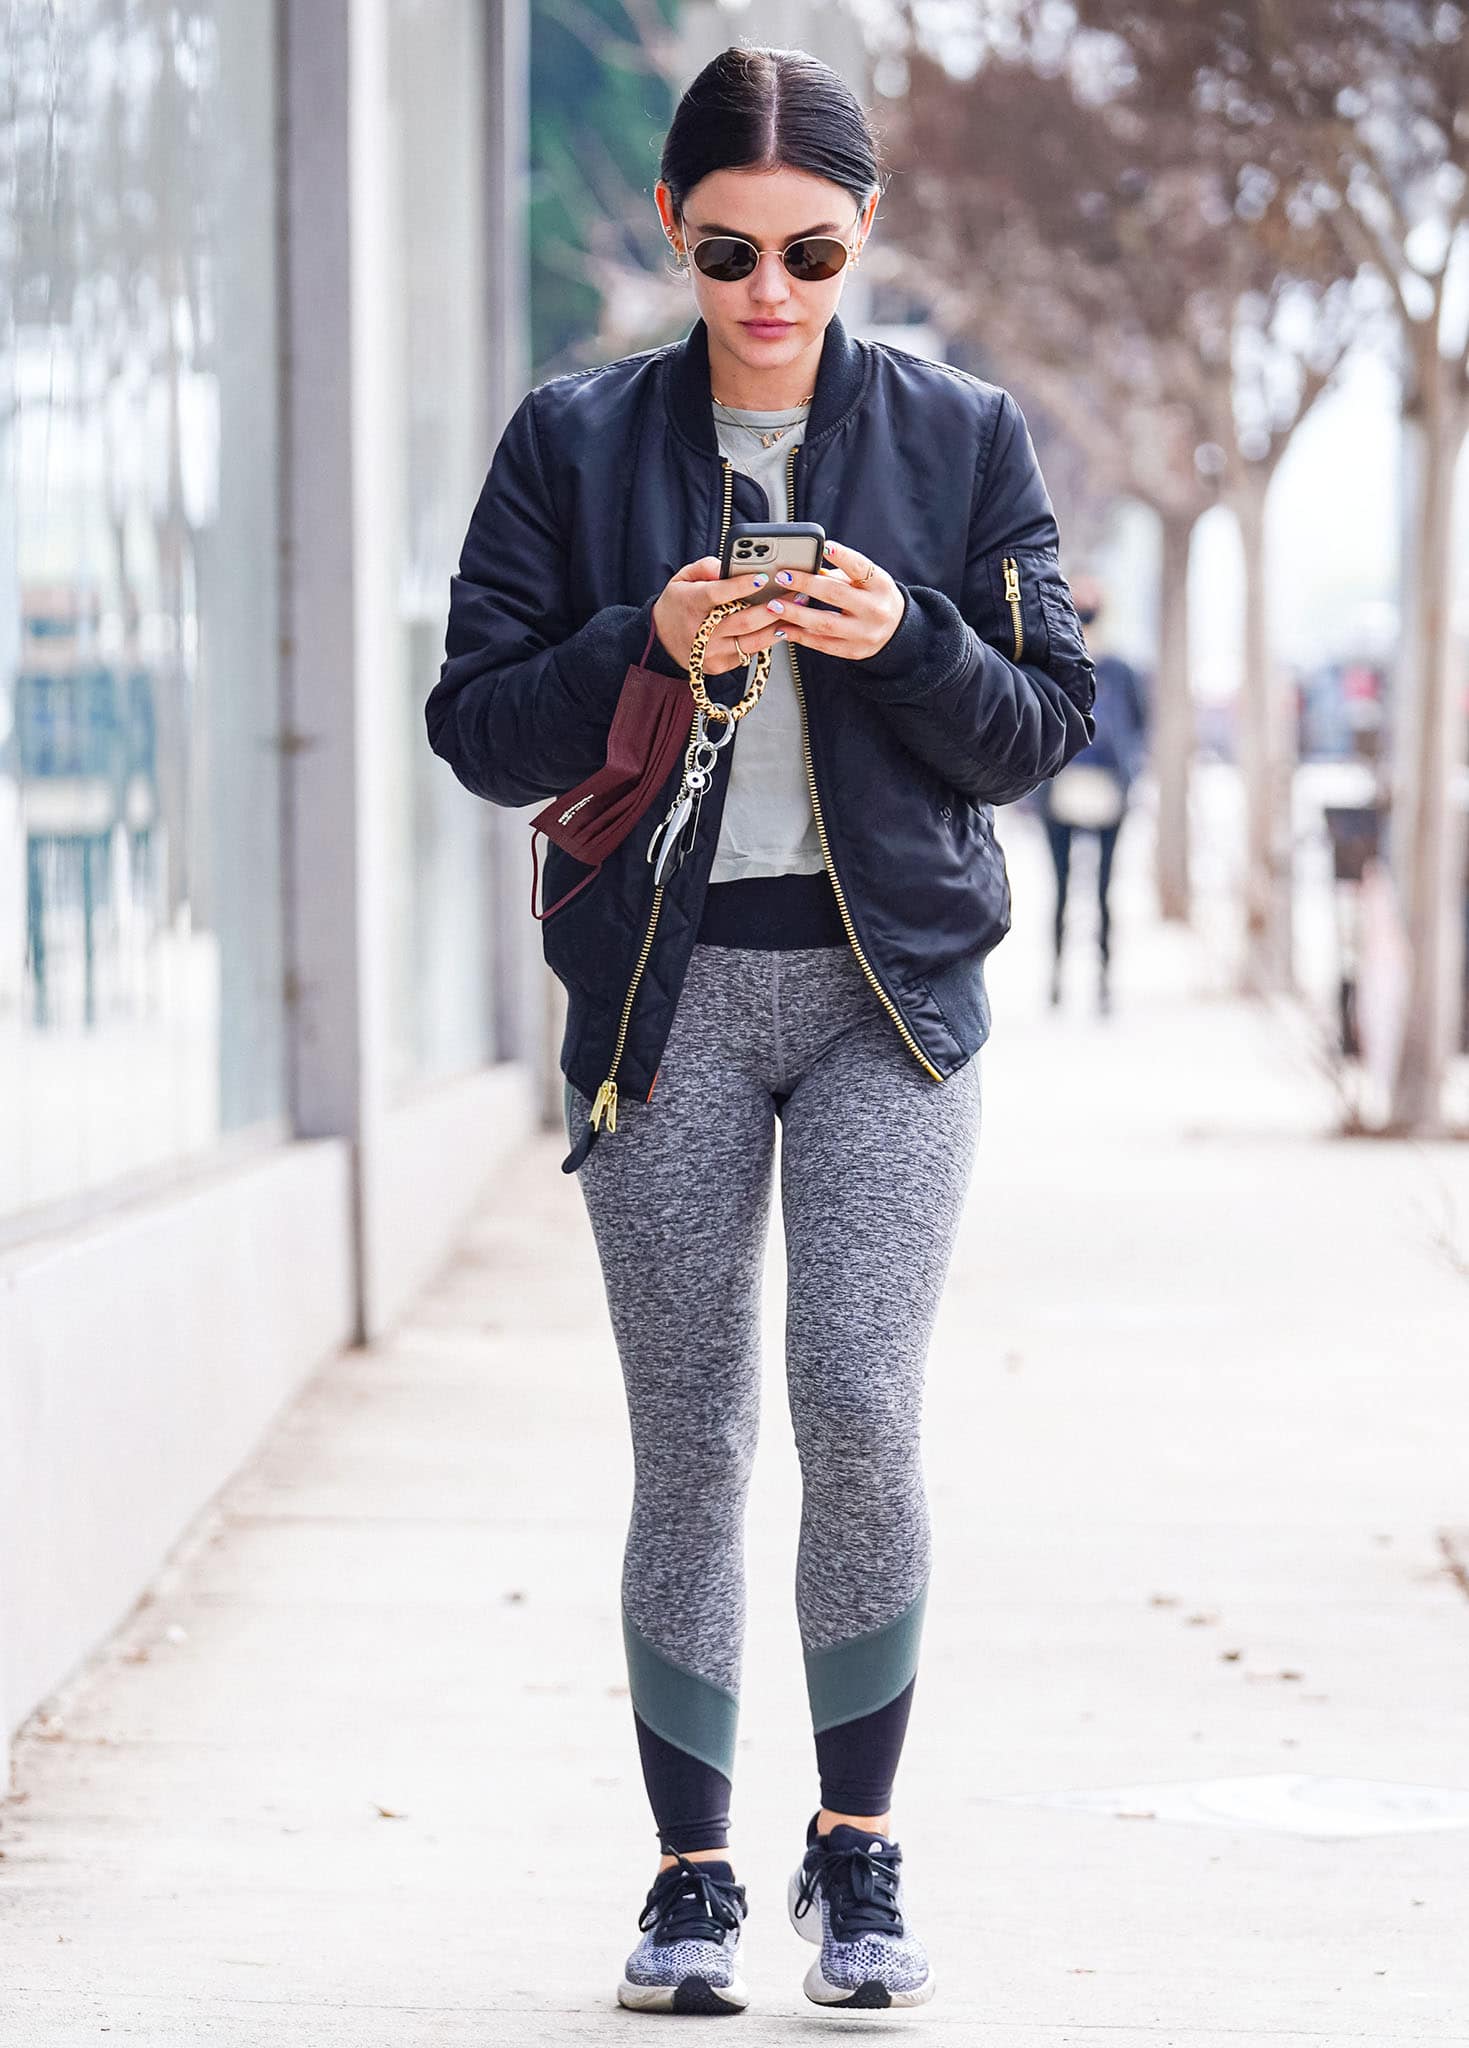 Lucy Hale nails athleisure aesthetic in gray tee, leggings, and navy bomber jacket